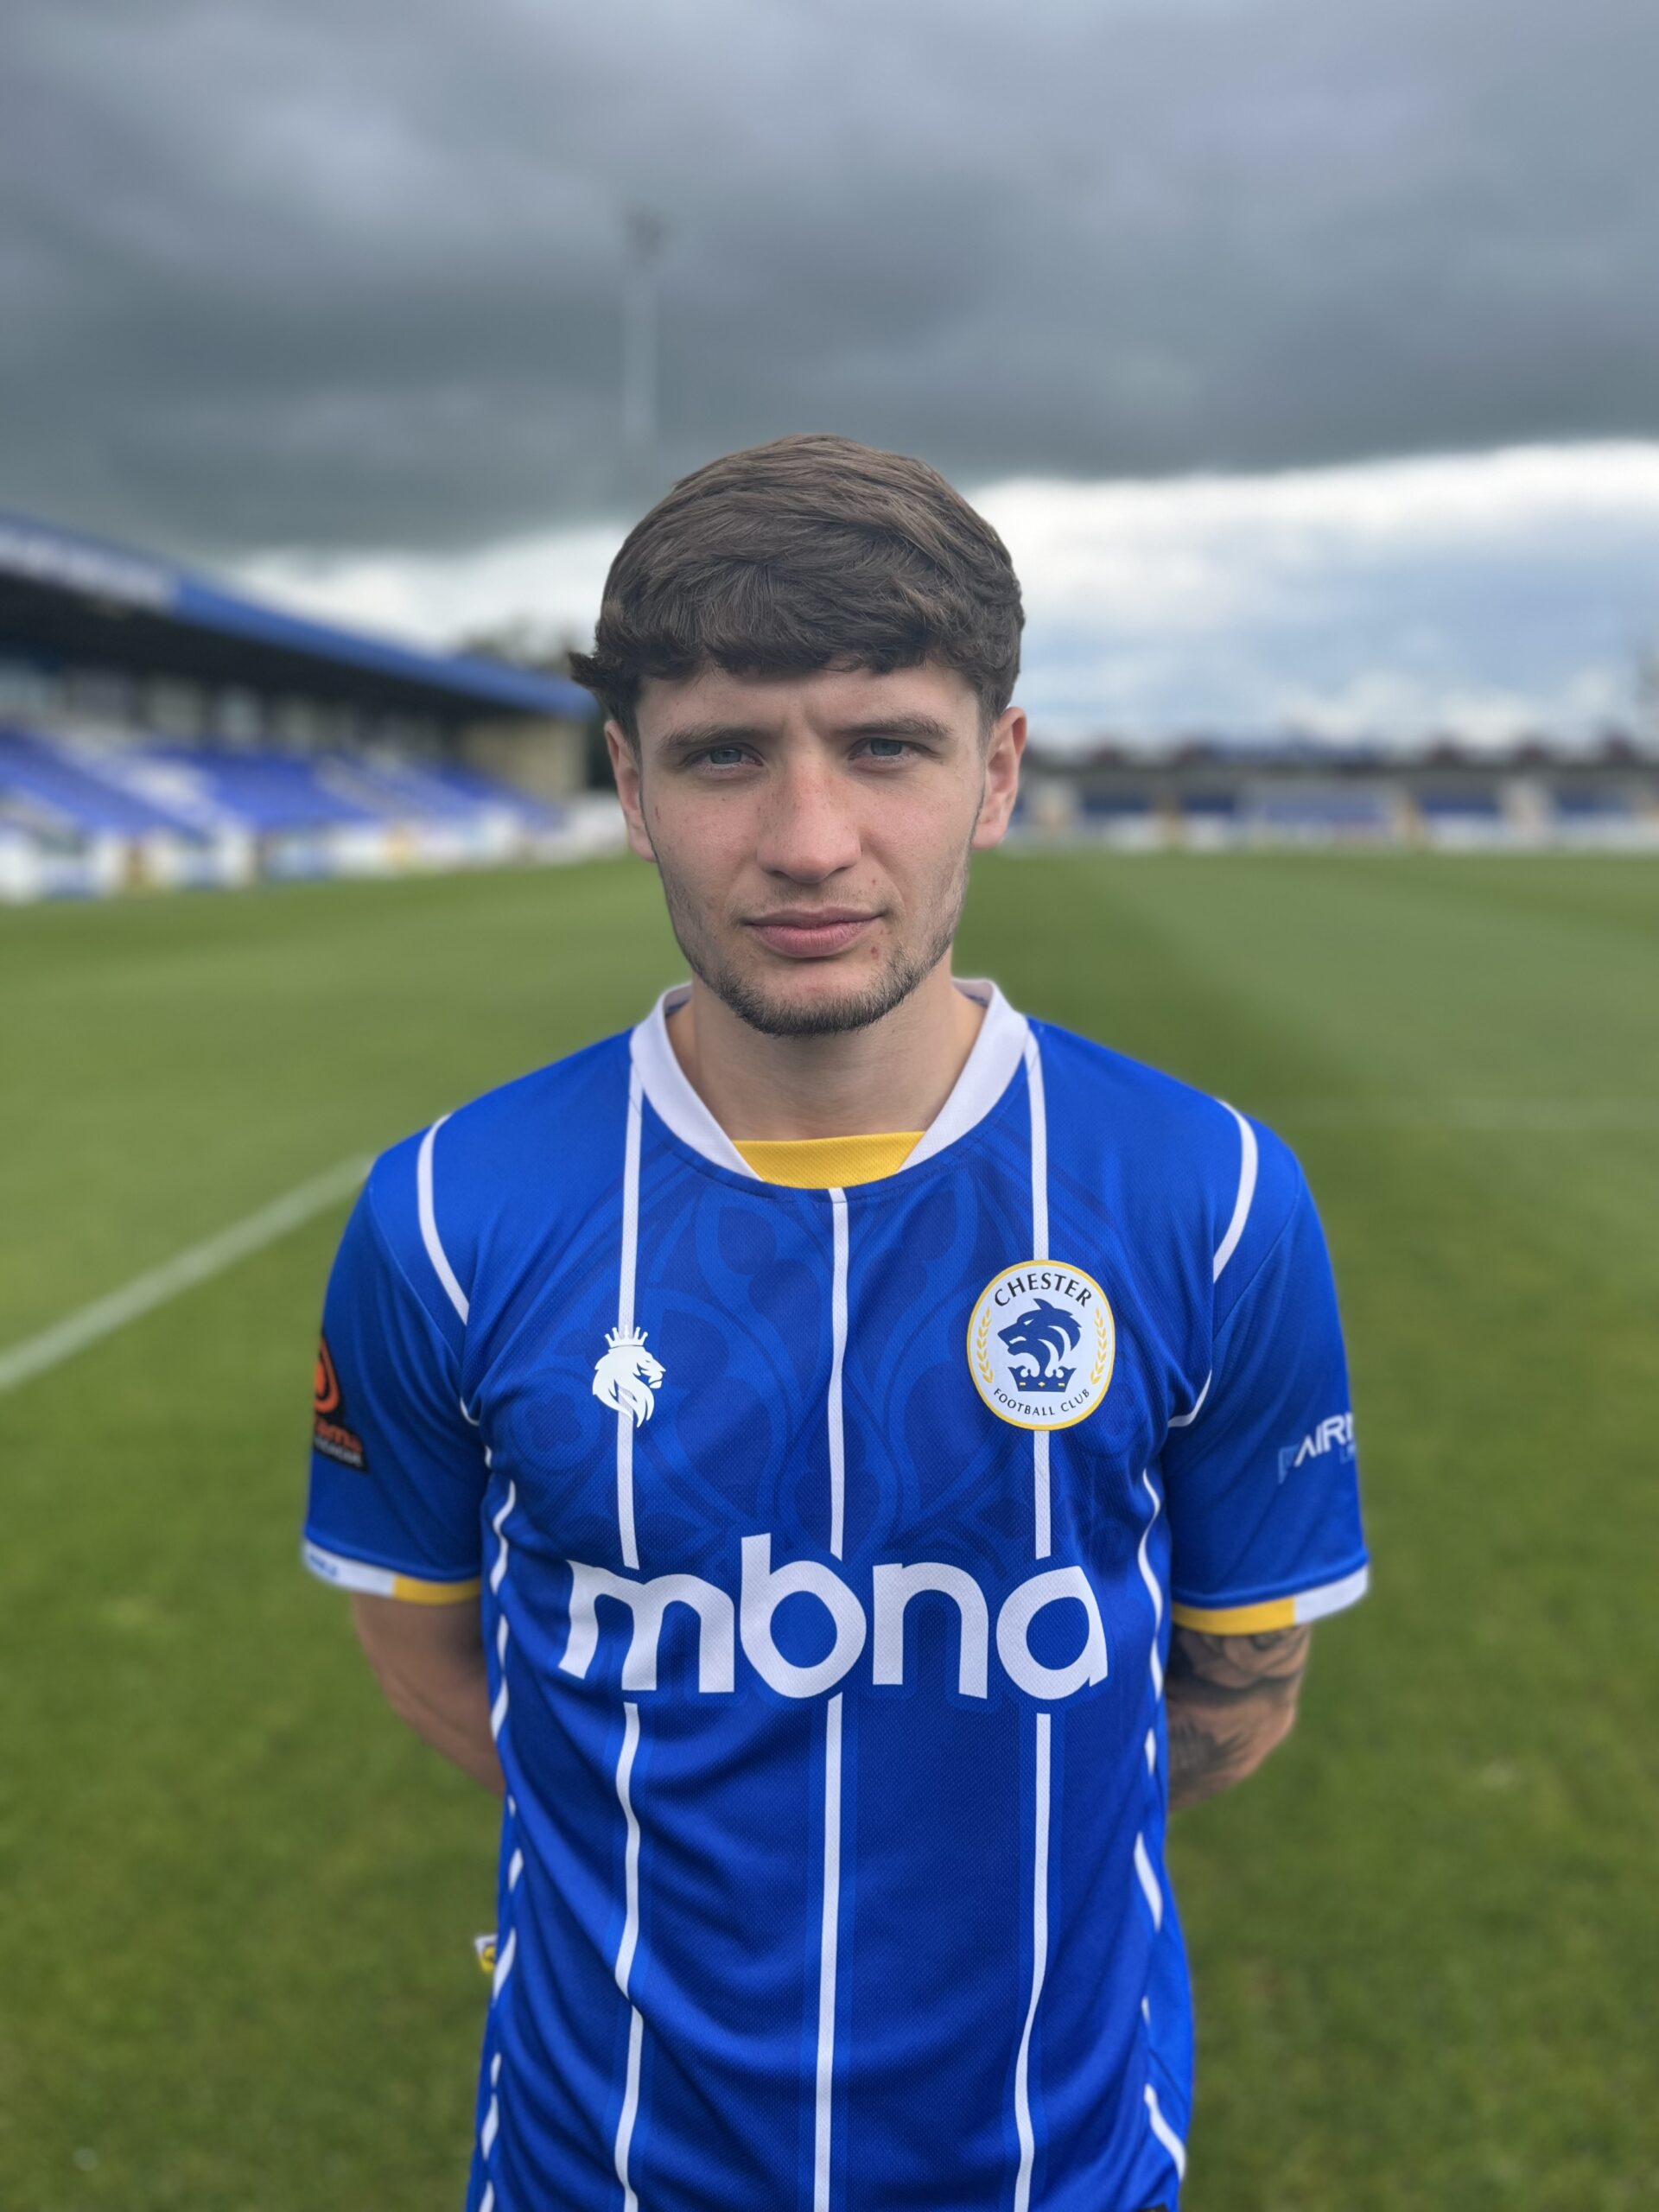 Connor Evans - Chester Football Club